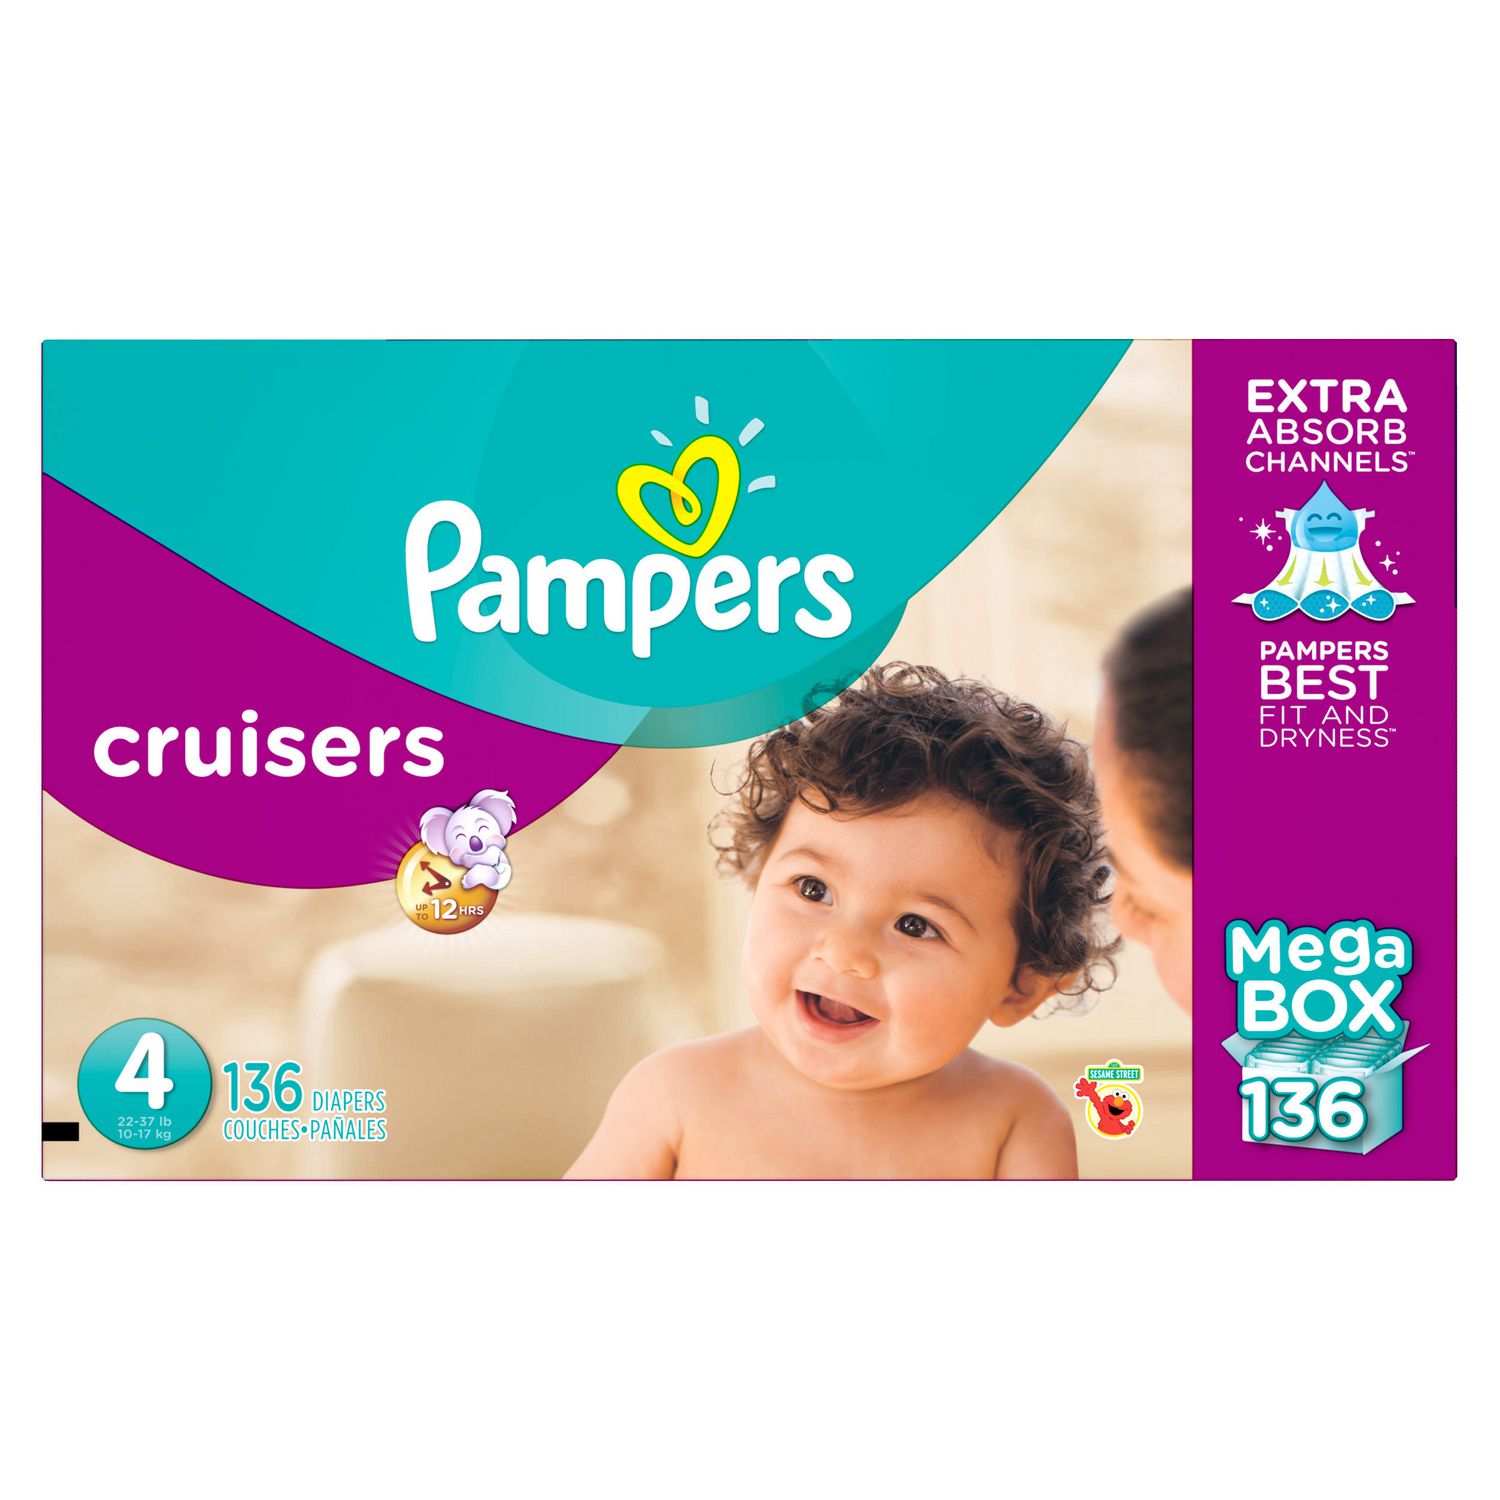 Pampers Cruisers Diapers | Walmart Canada